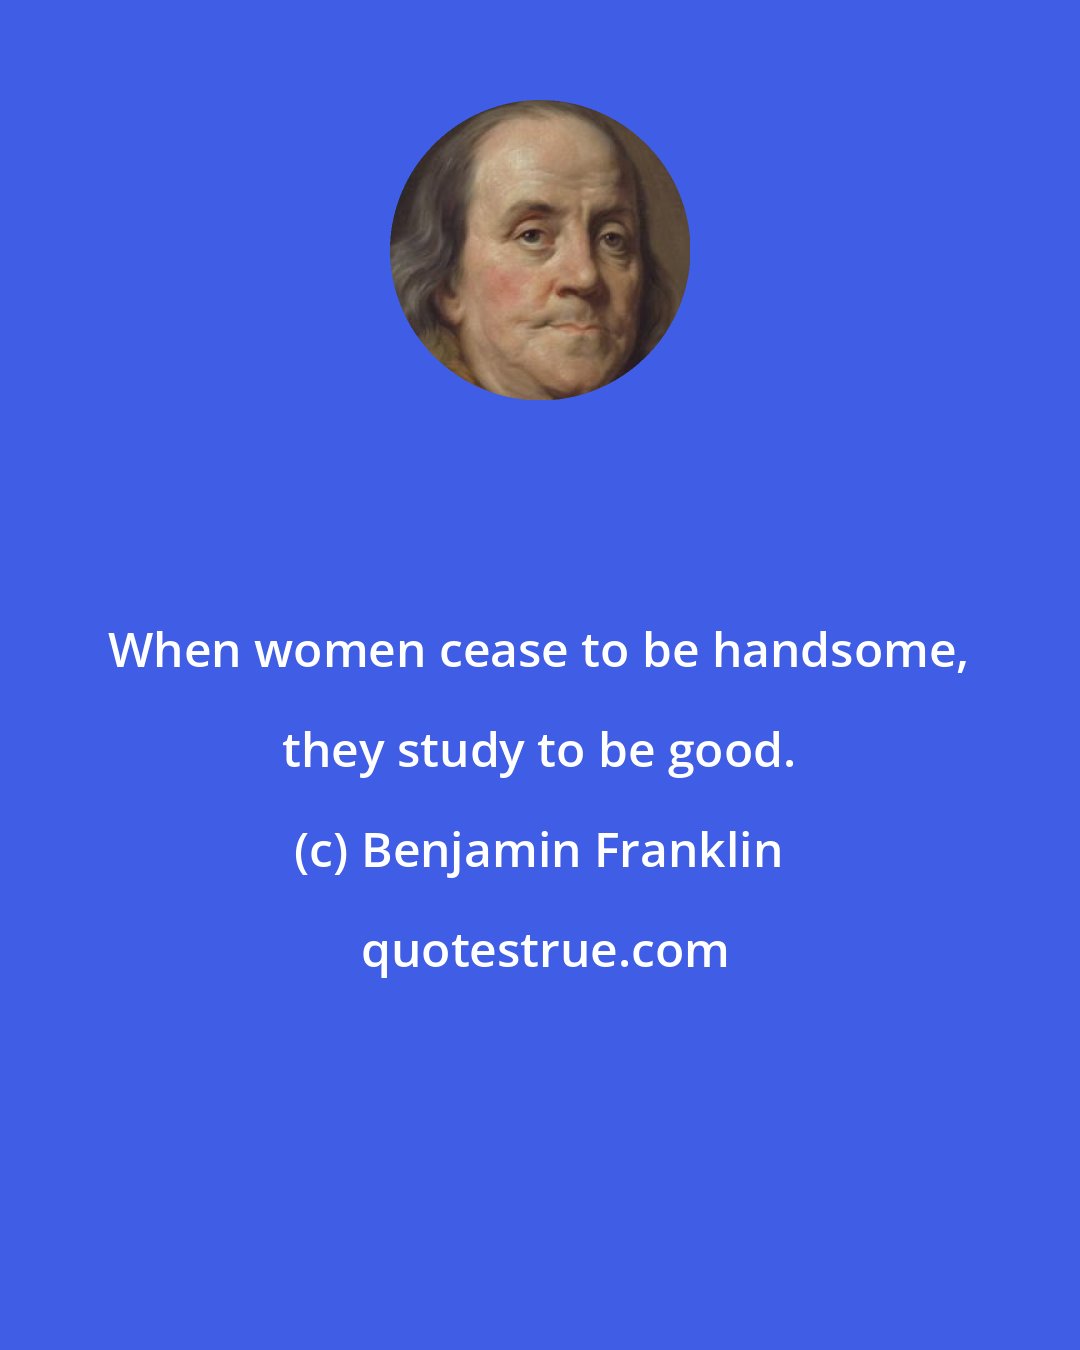 Benjamin Franklin: When women cease to be handsome, they study to be good.